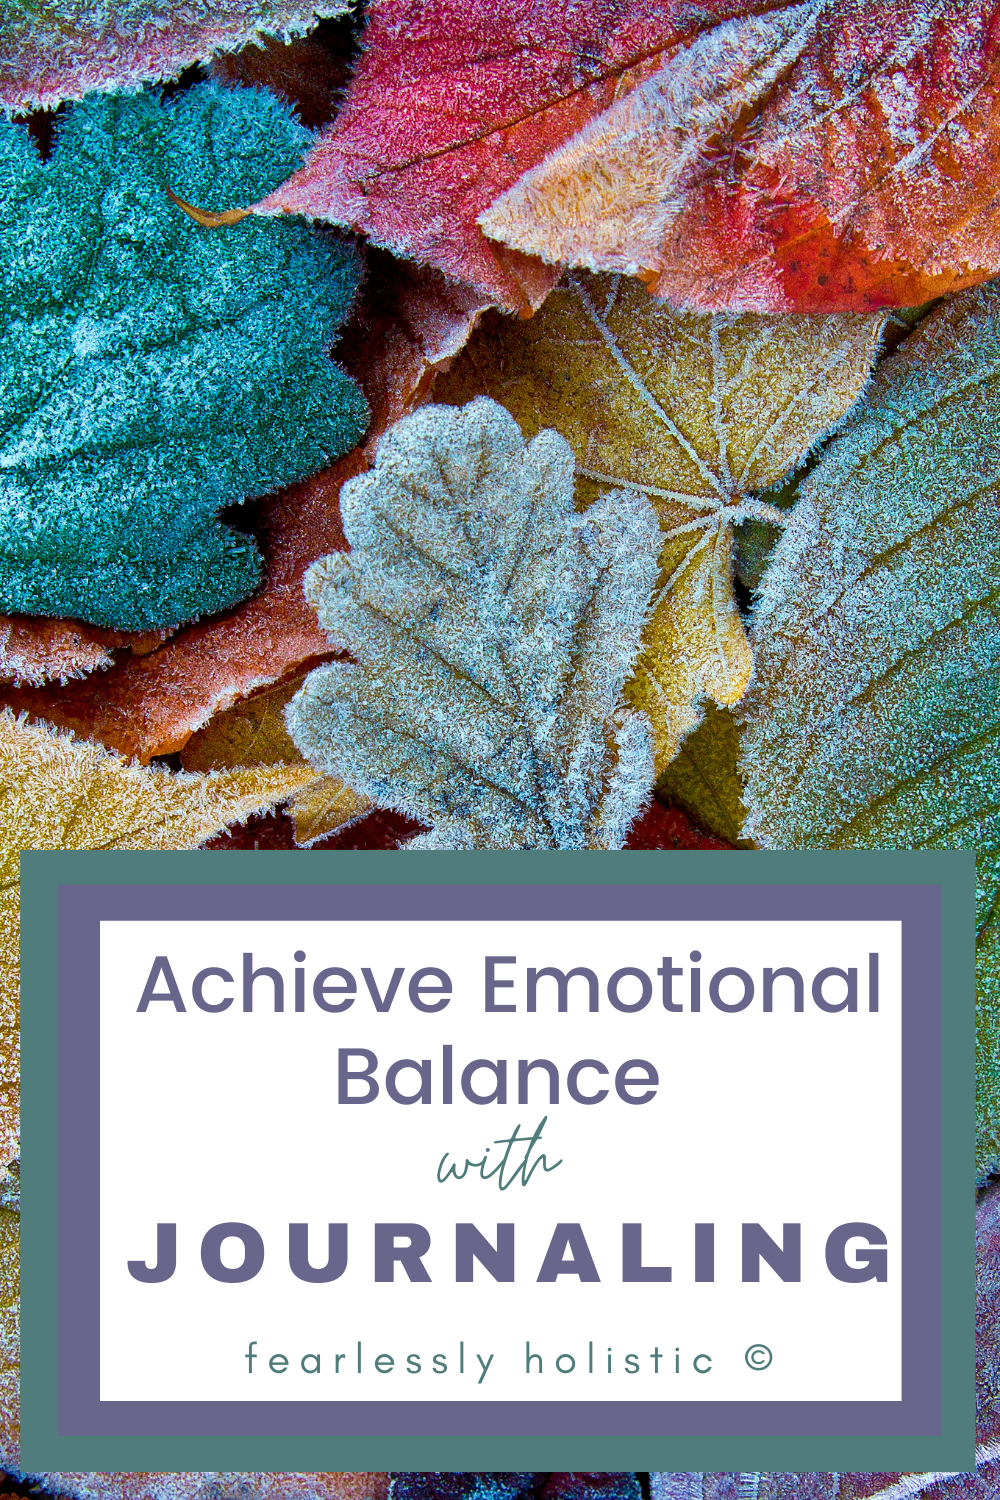 Cultivating Emotional Balance with Journaling